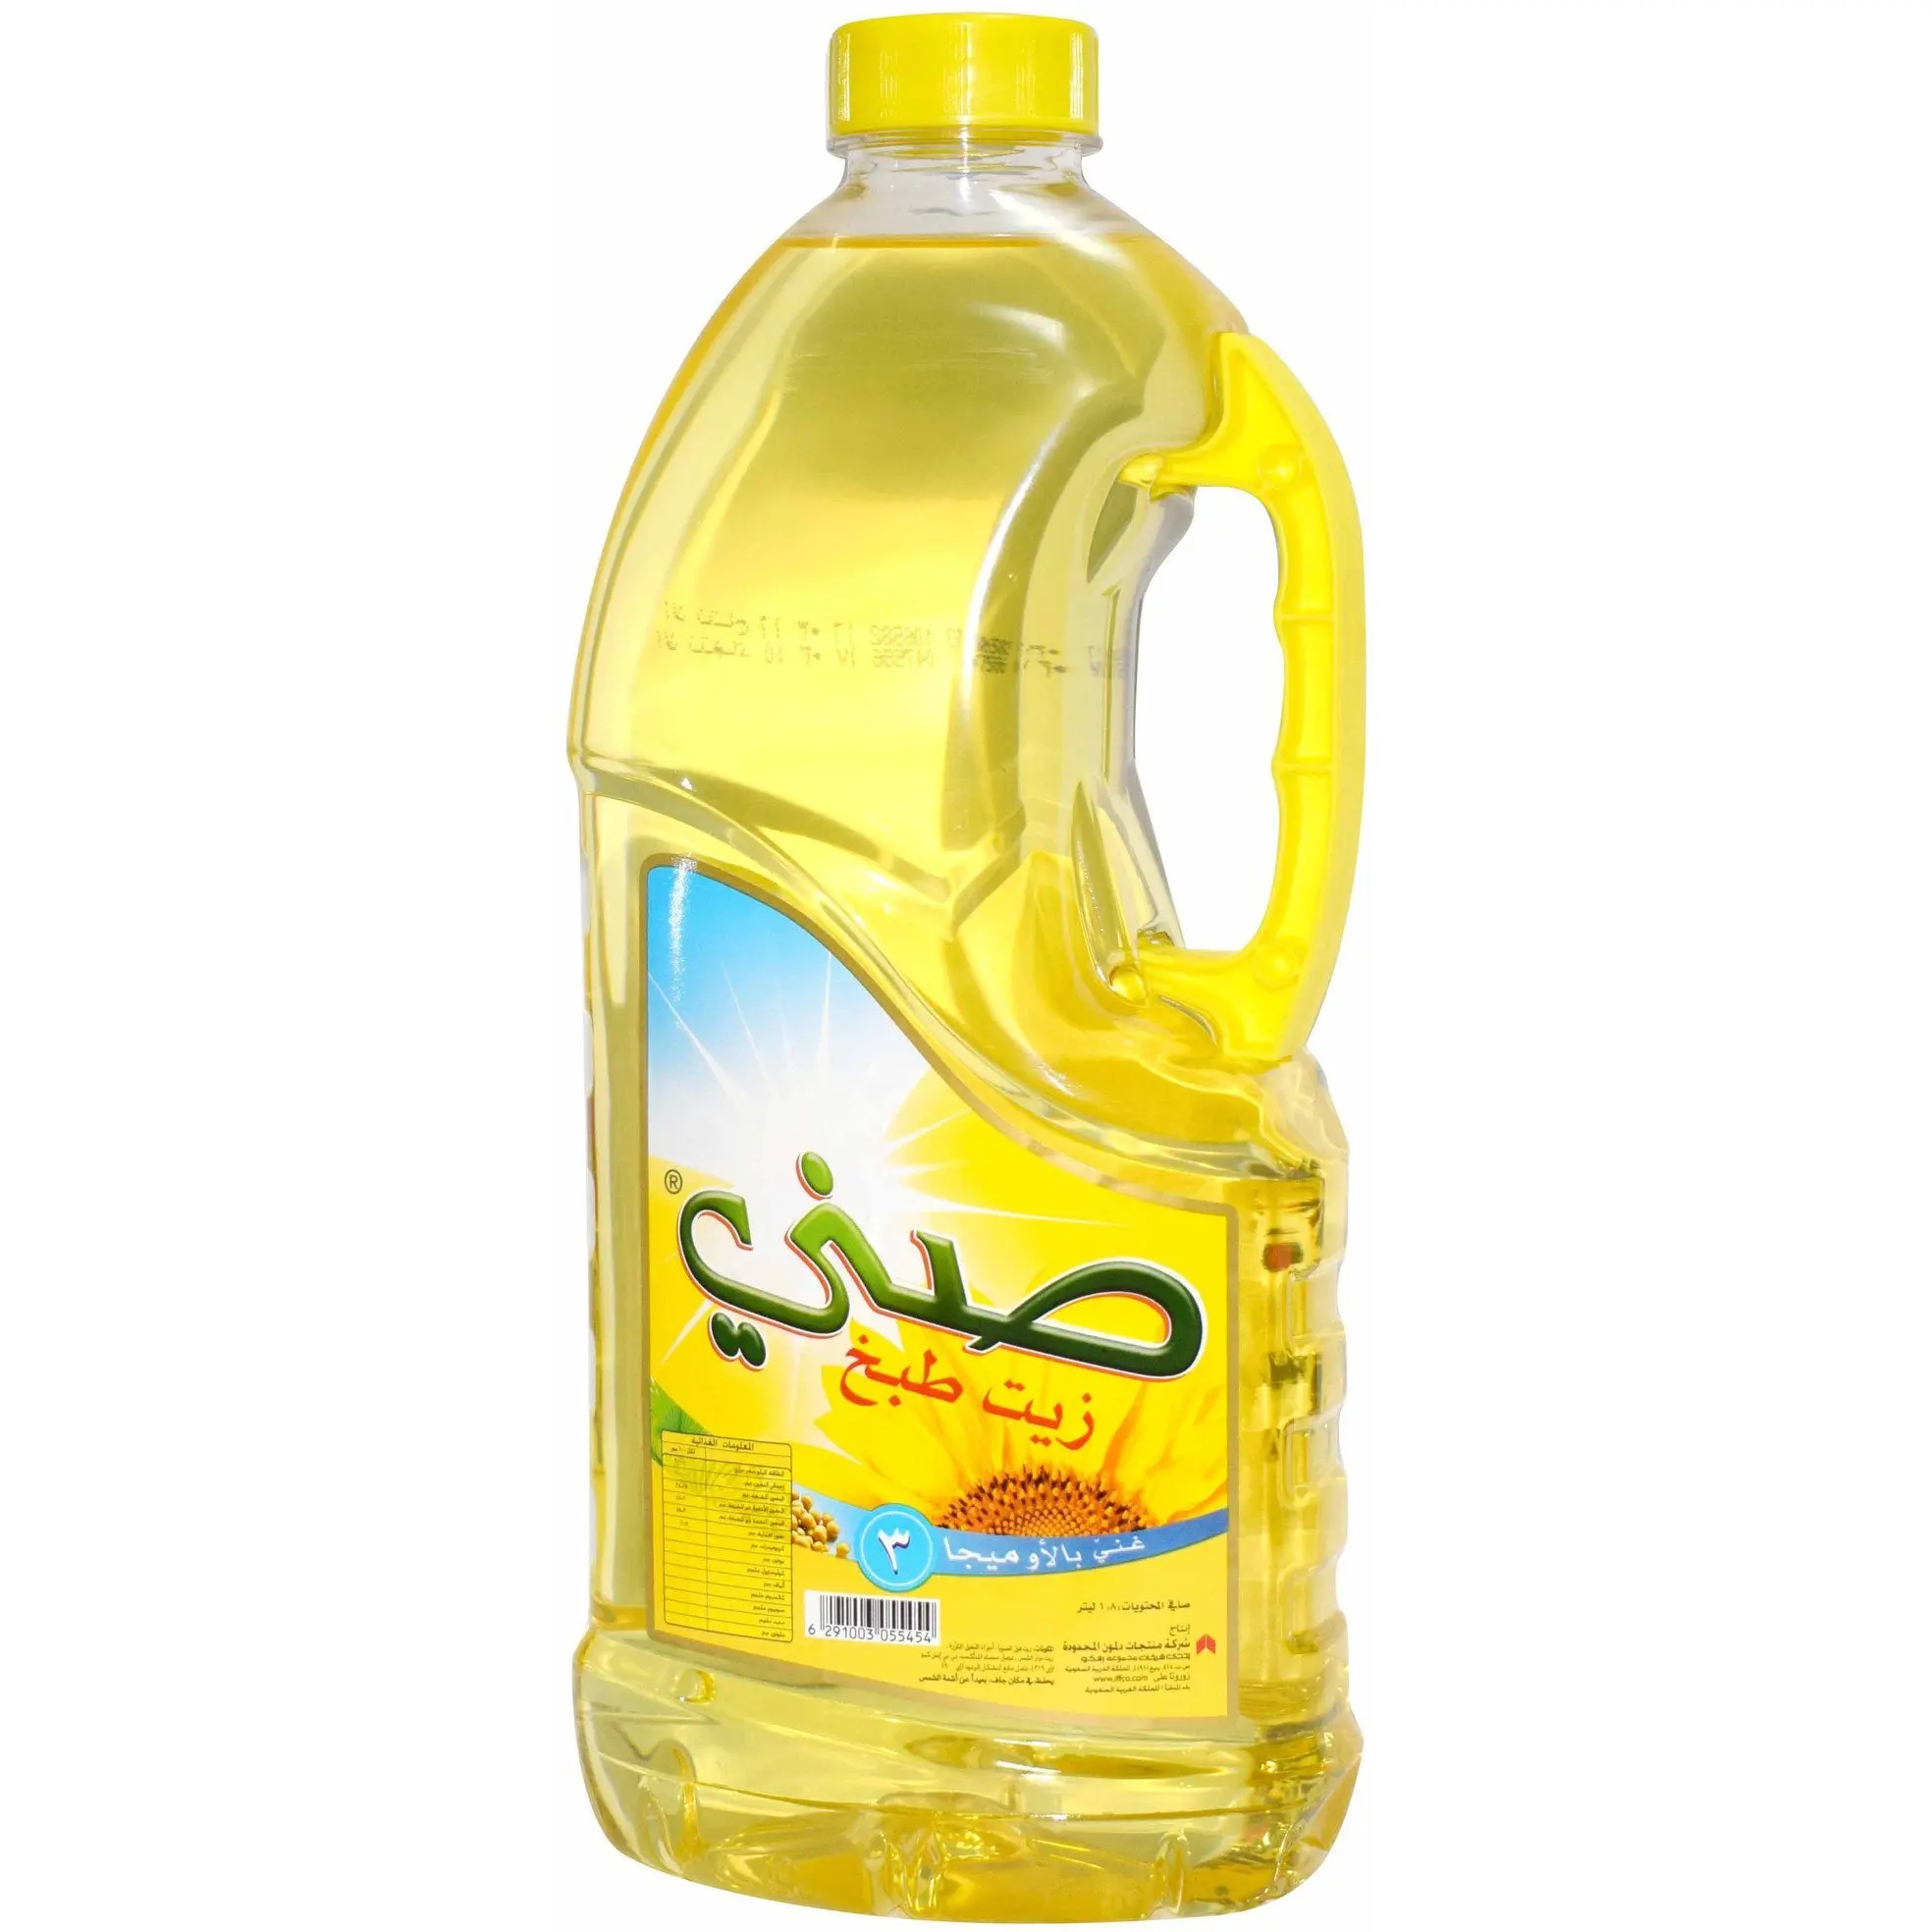 Premium cooking oil Trans Fat Free USA CP10 18L high cp cooking oil Jerrycan Palm Olein for fast food restaurant